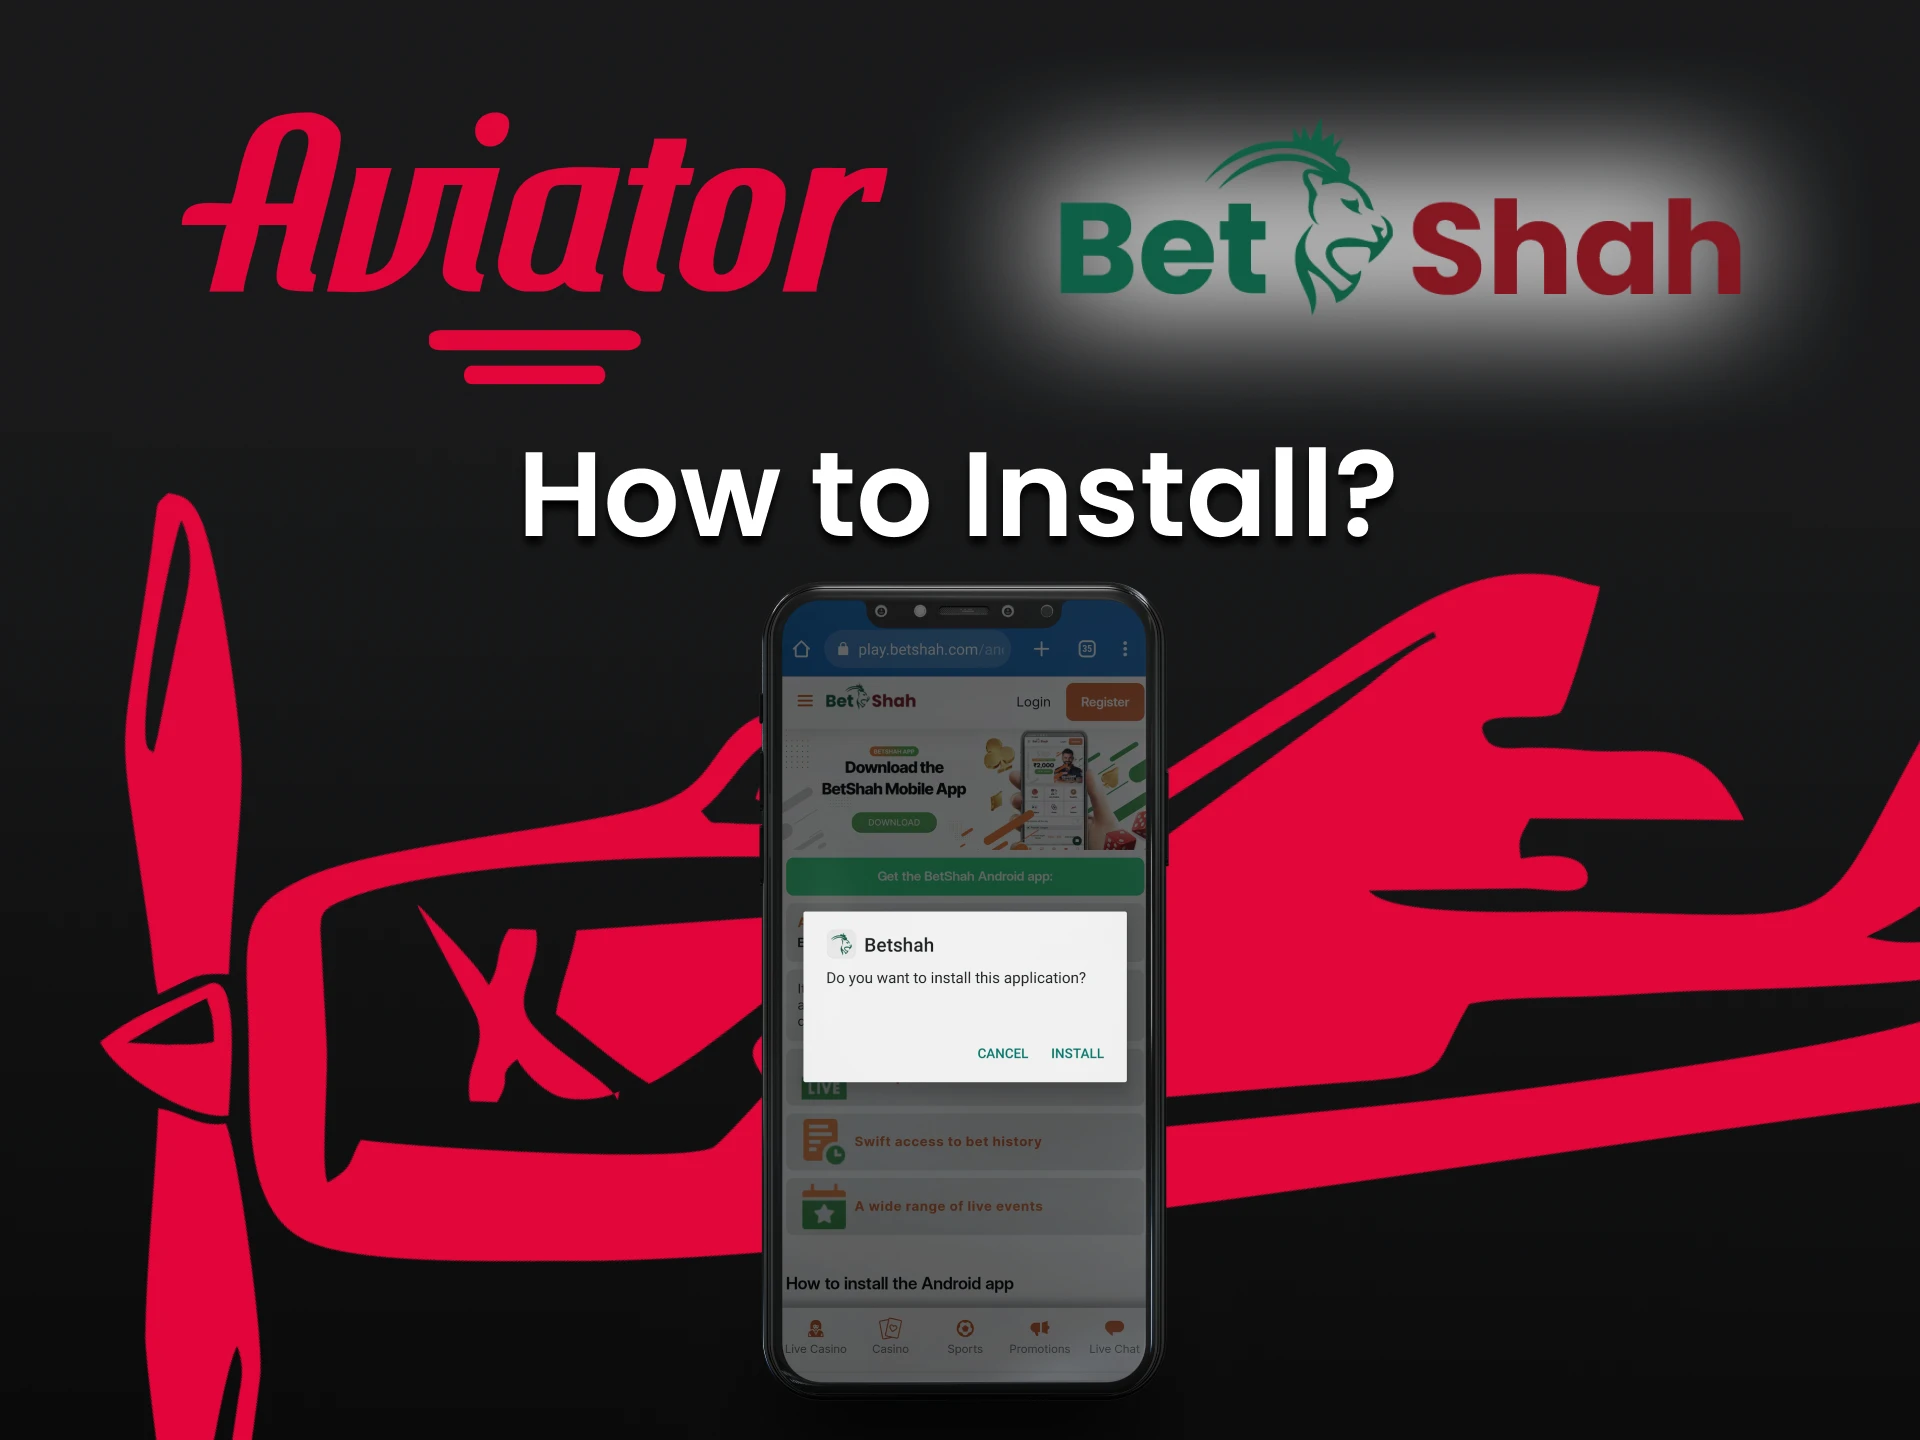 We will tell you how to install the BetShah app to play Aviator.